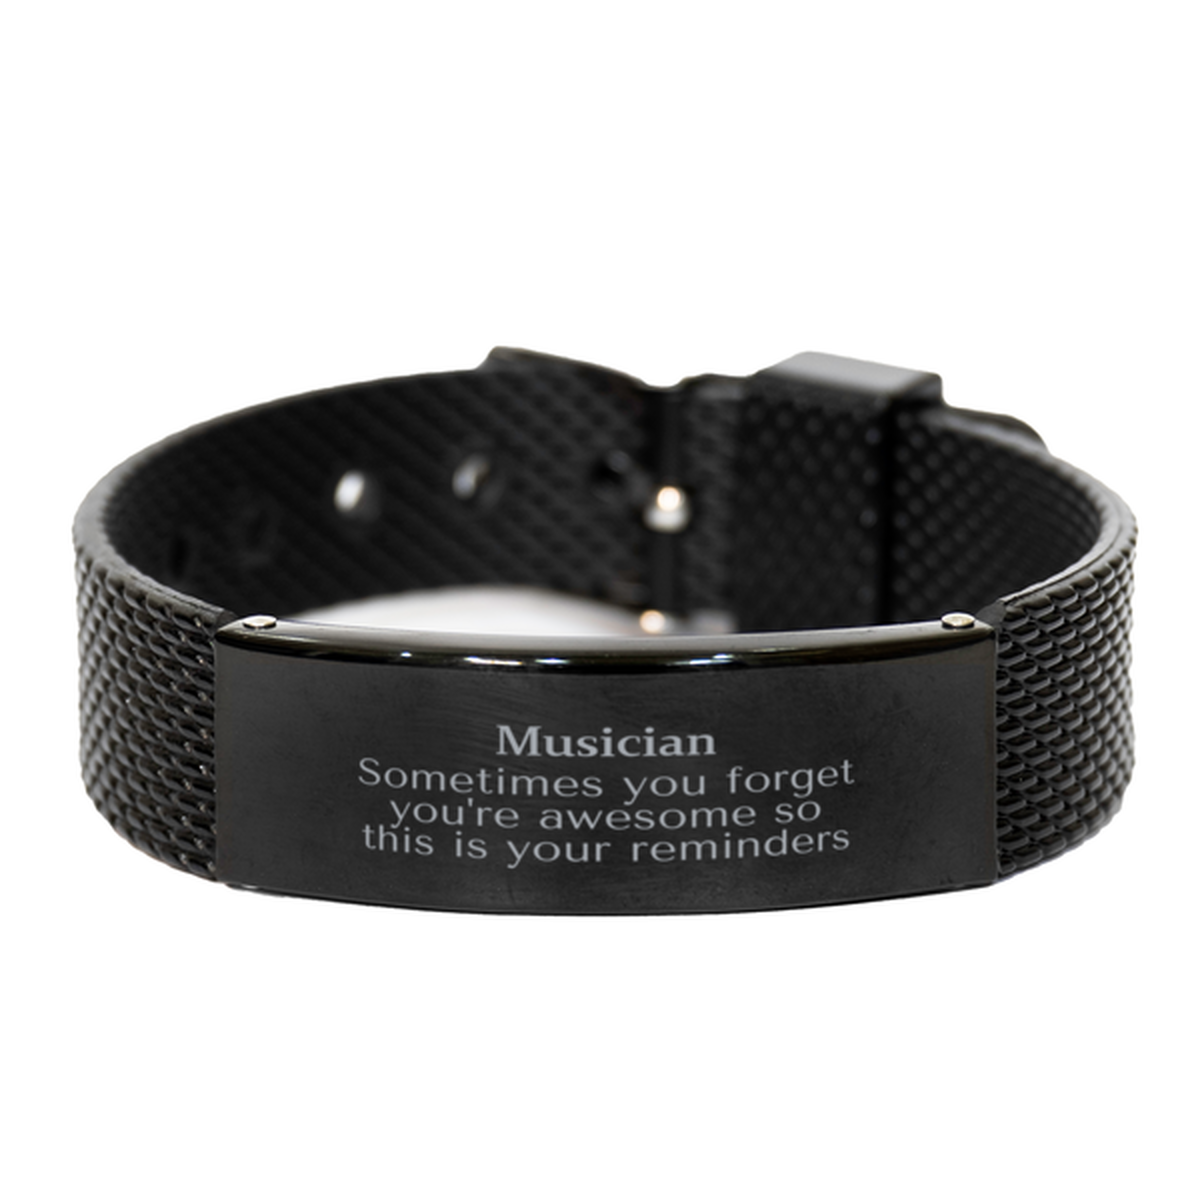 Sentimental Musician Black Shark Mesh Bracelet, Musician Sometimes you forget you're awesome so this is your reminders, Graduation Christmas Birthday Gifts for Musician, Men, Women, Coworkers